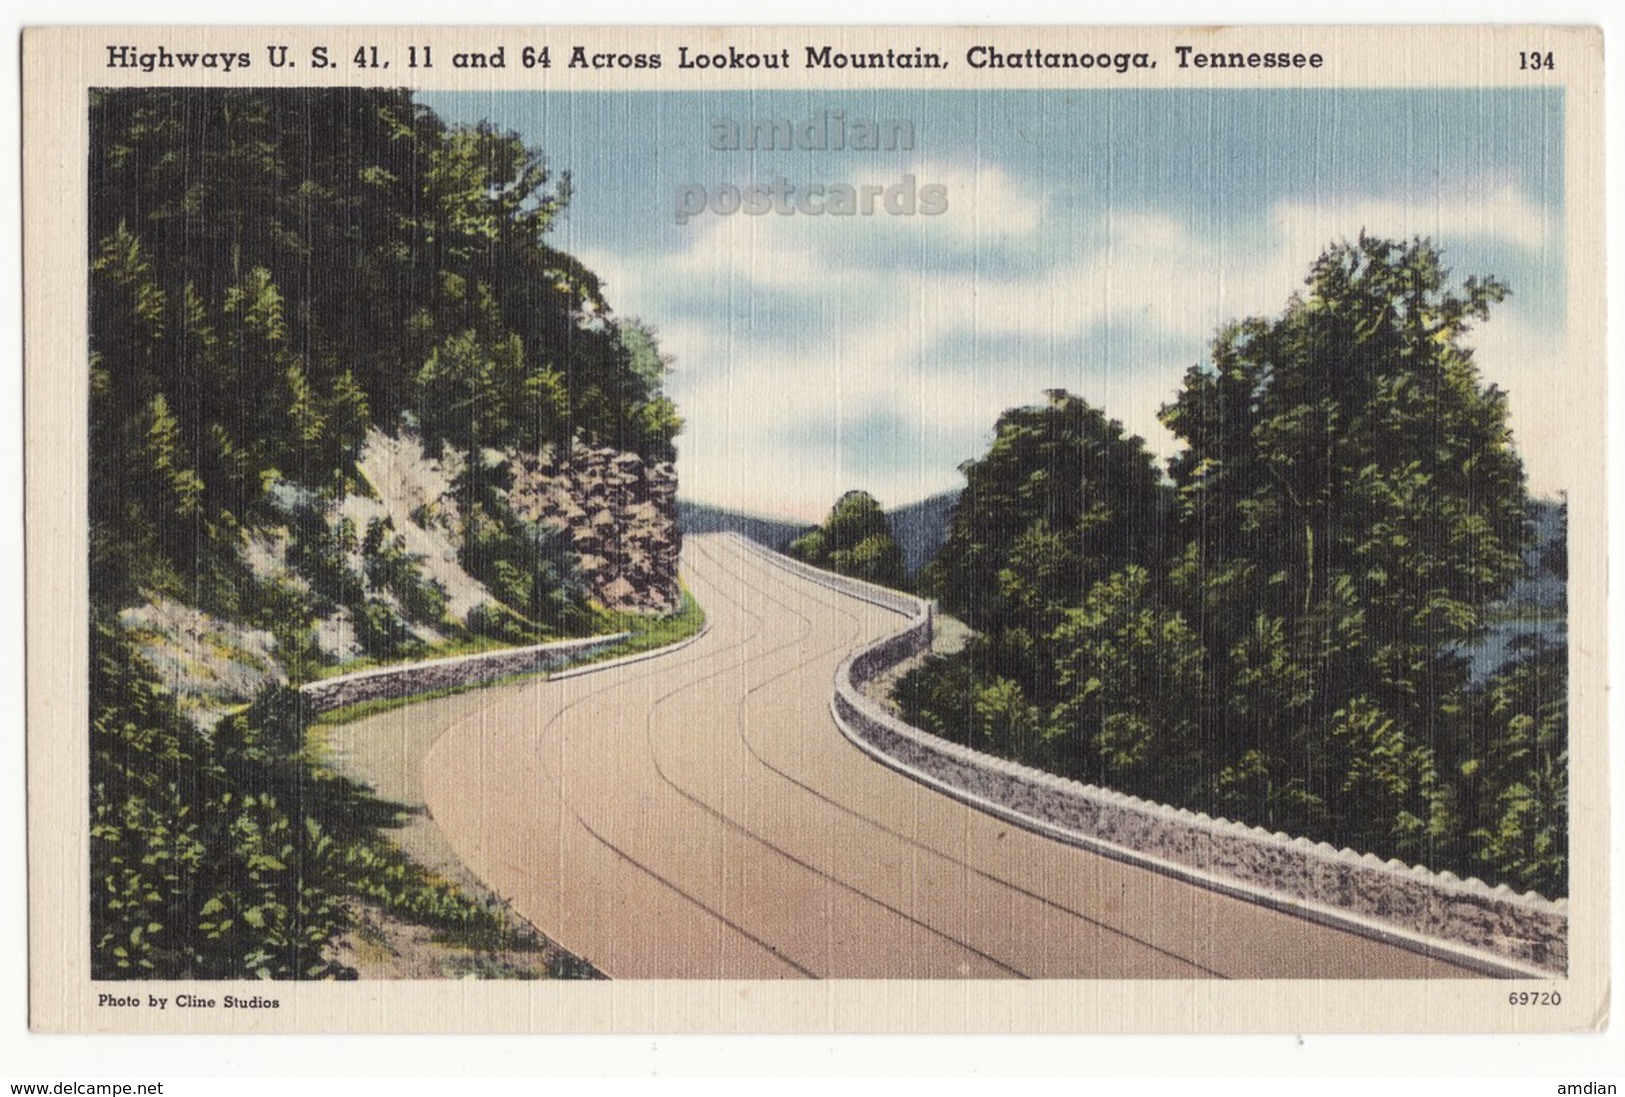 USA, HIGHWAYS US 41, 11 AND 64 ACROSS LOOKOUT MOUNTAIN CHATTANOOGA TN, C1940s-1950s Unused Vintage Tennessee Postcard - Chattanooga